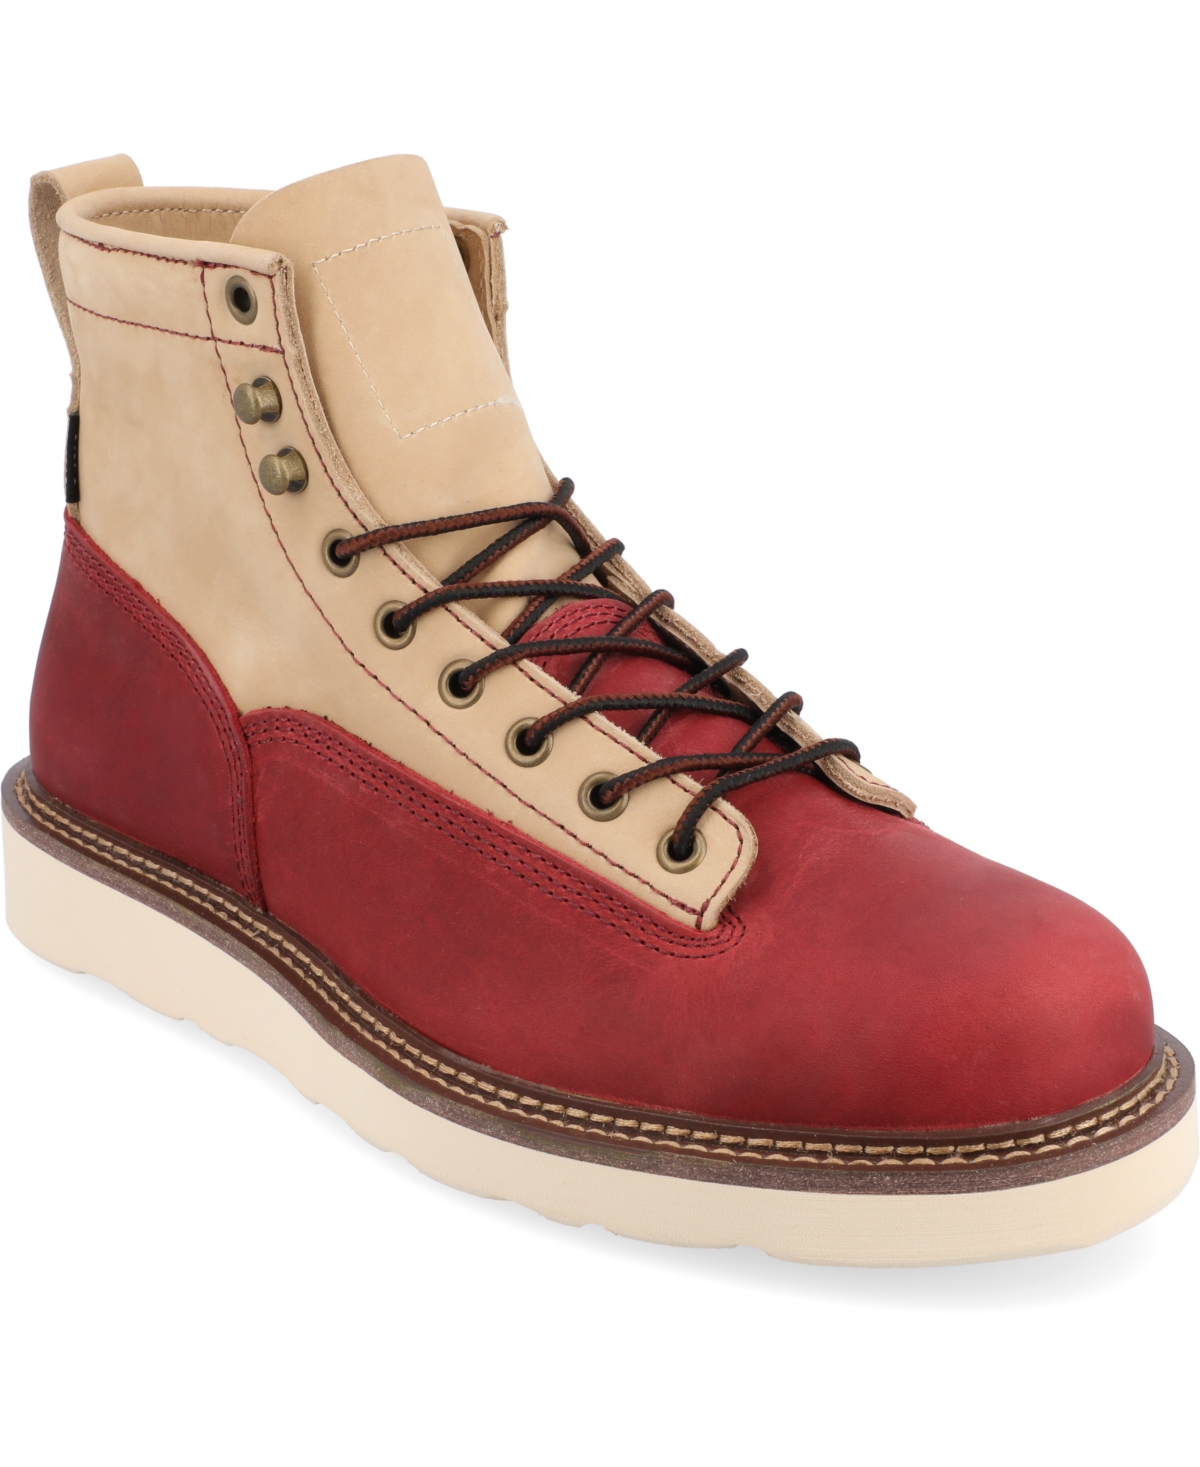 Shop Taft 365 Men's Model 001 Lace-up Ankle Boots In Cherry,cream